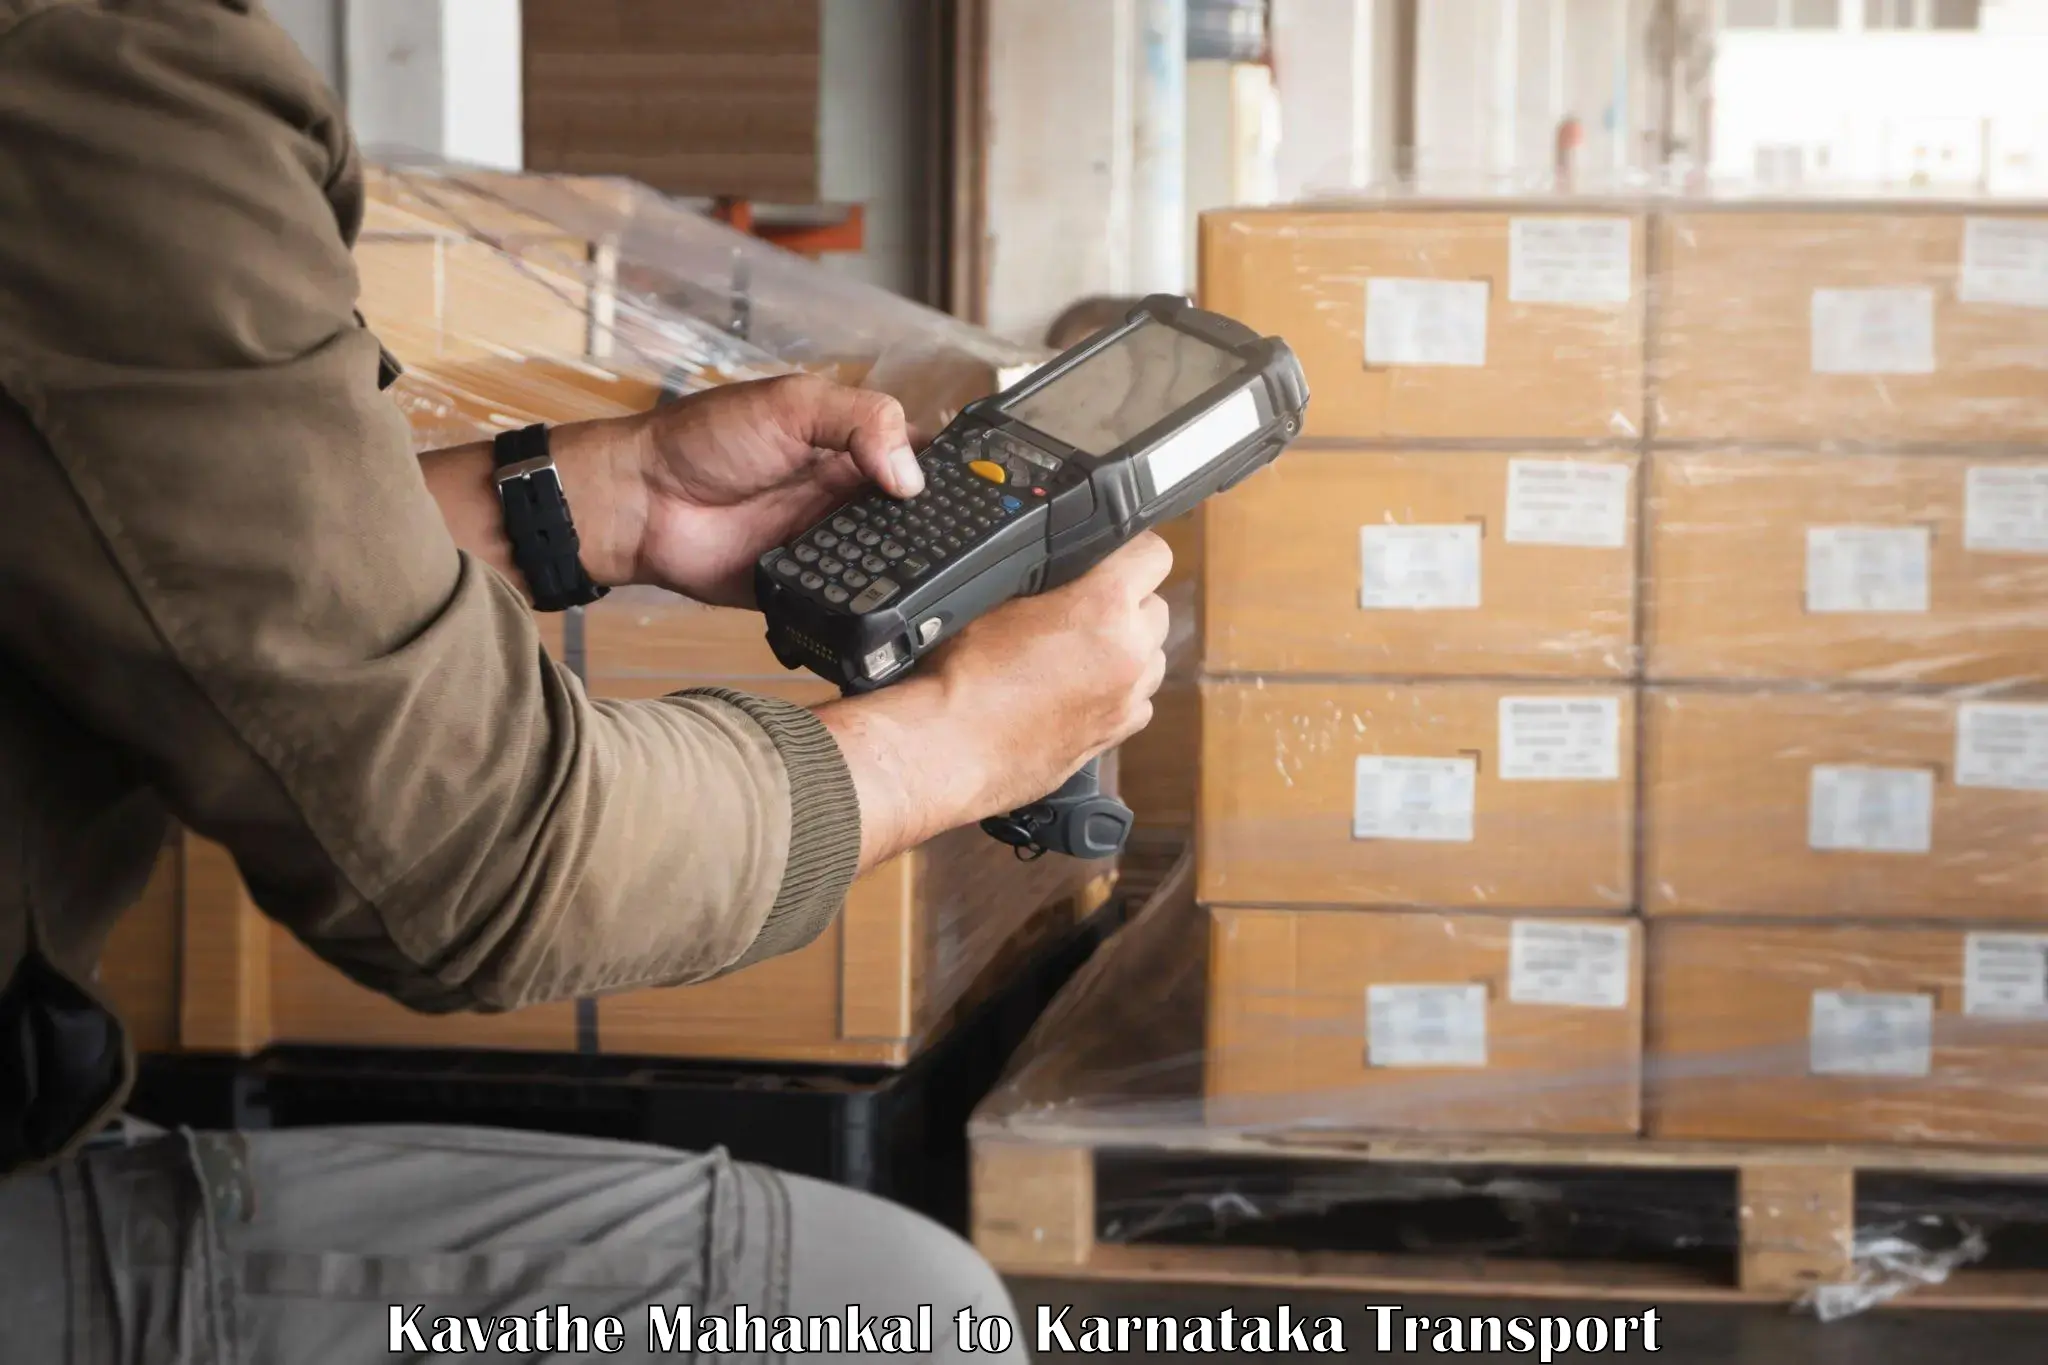 Container transport service Kavathe Mahankal to Bagalkot